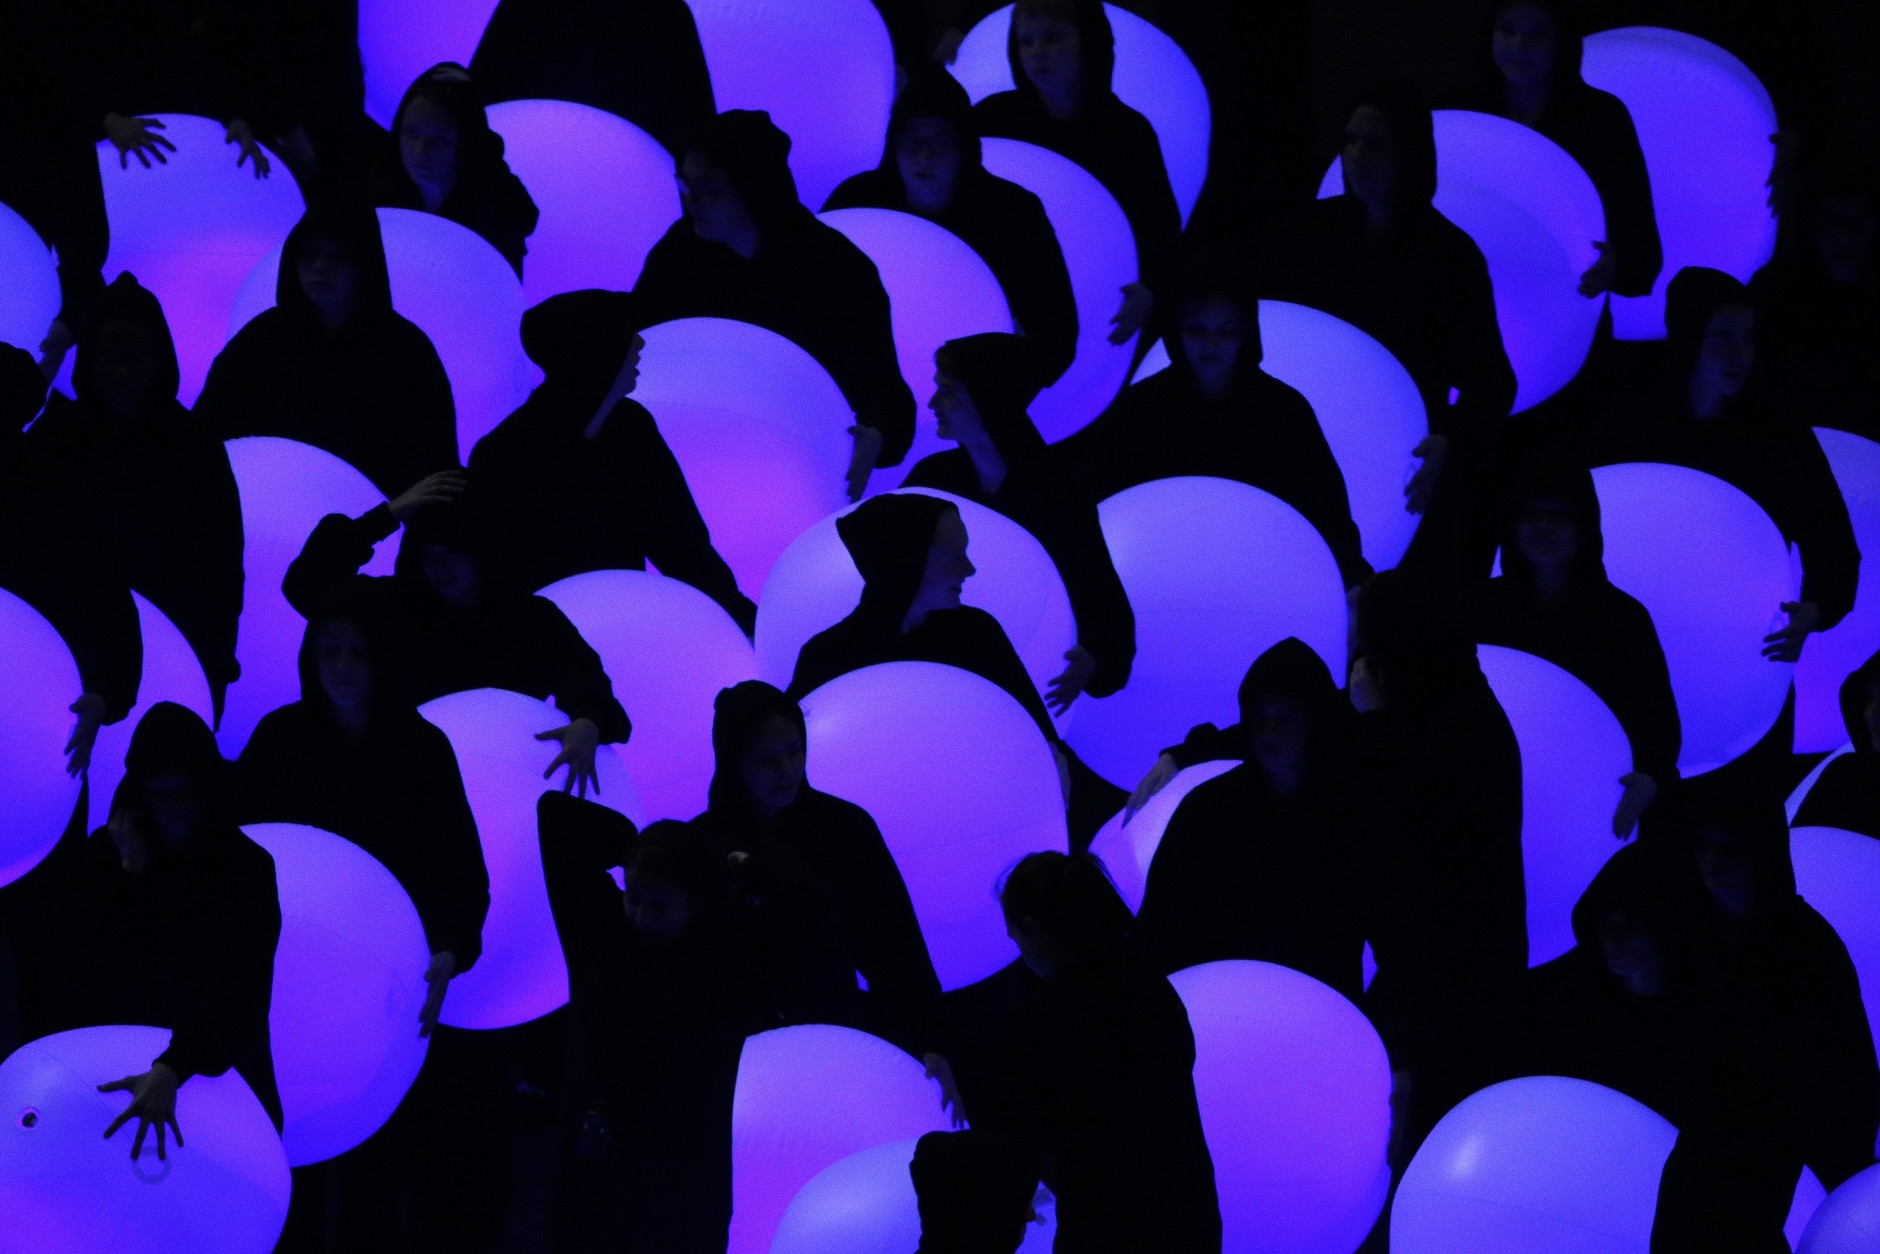 Performers enter the field during halftime of NFL Super Bowl XLIX football game between the Seattle Seahawks and the New England Patriots 
Sunday, Feb. 1, 2015, in Glendale, Ariz. (AP Photo/Charlie Riedel)